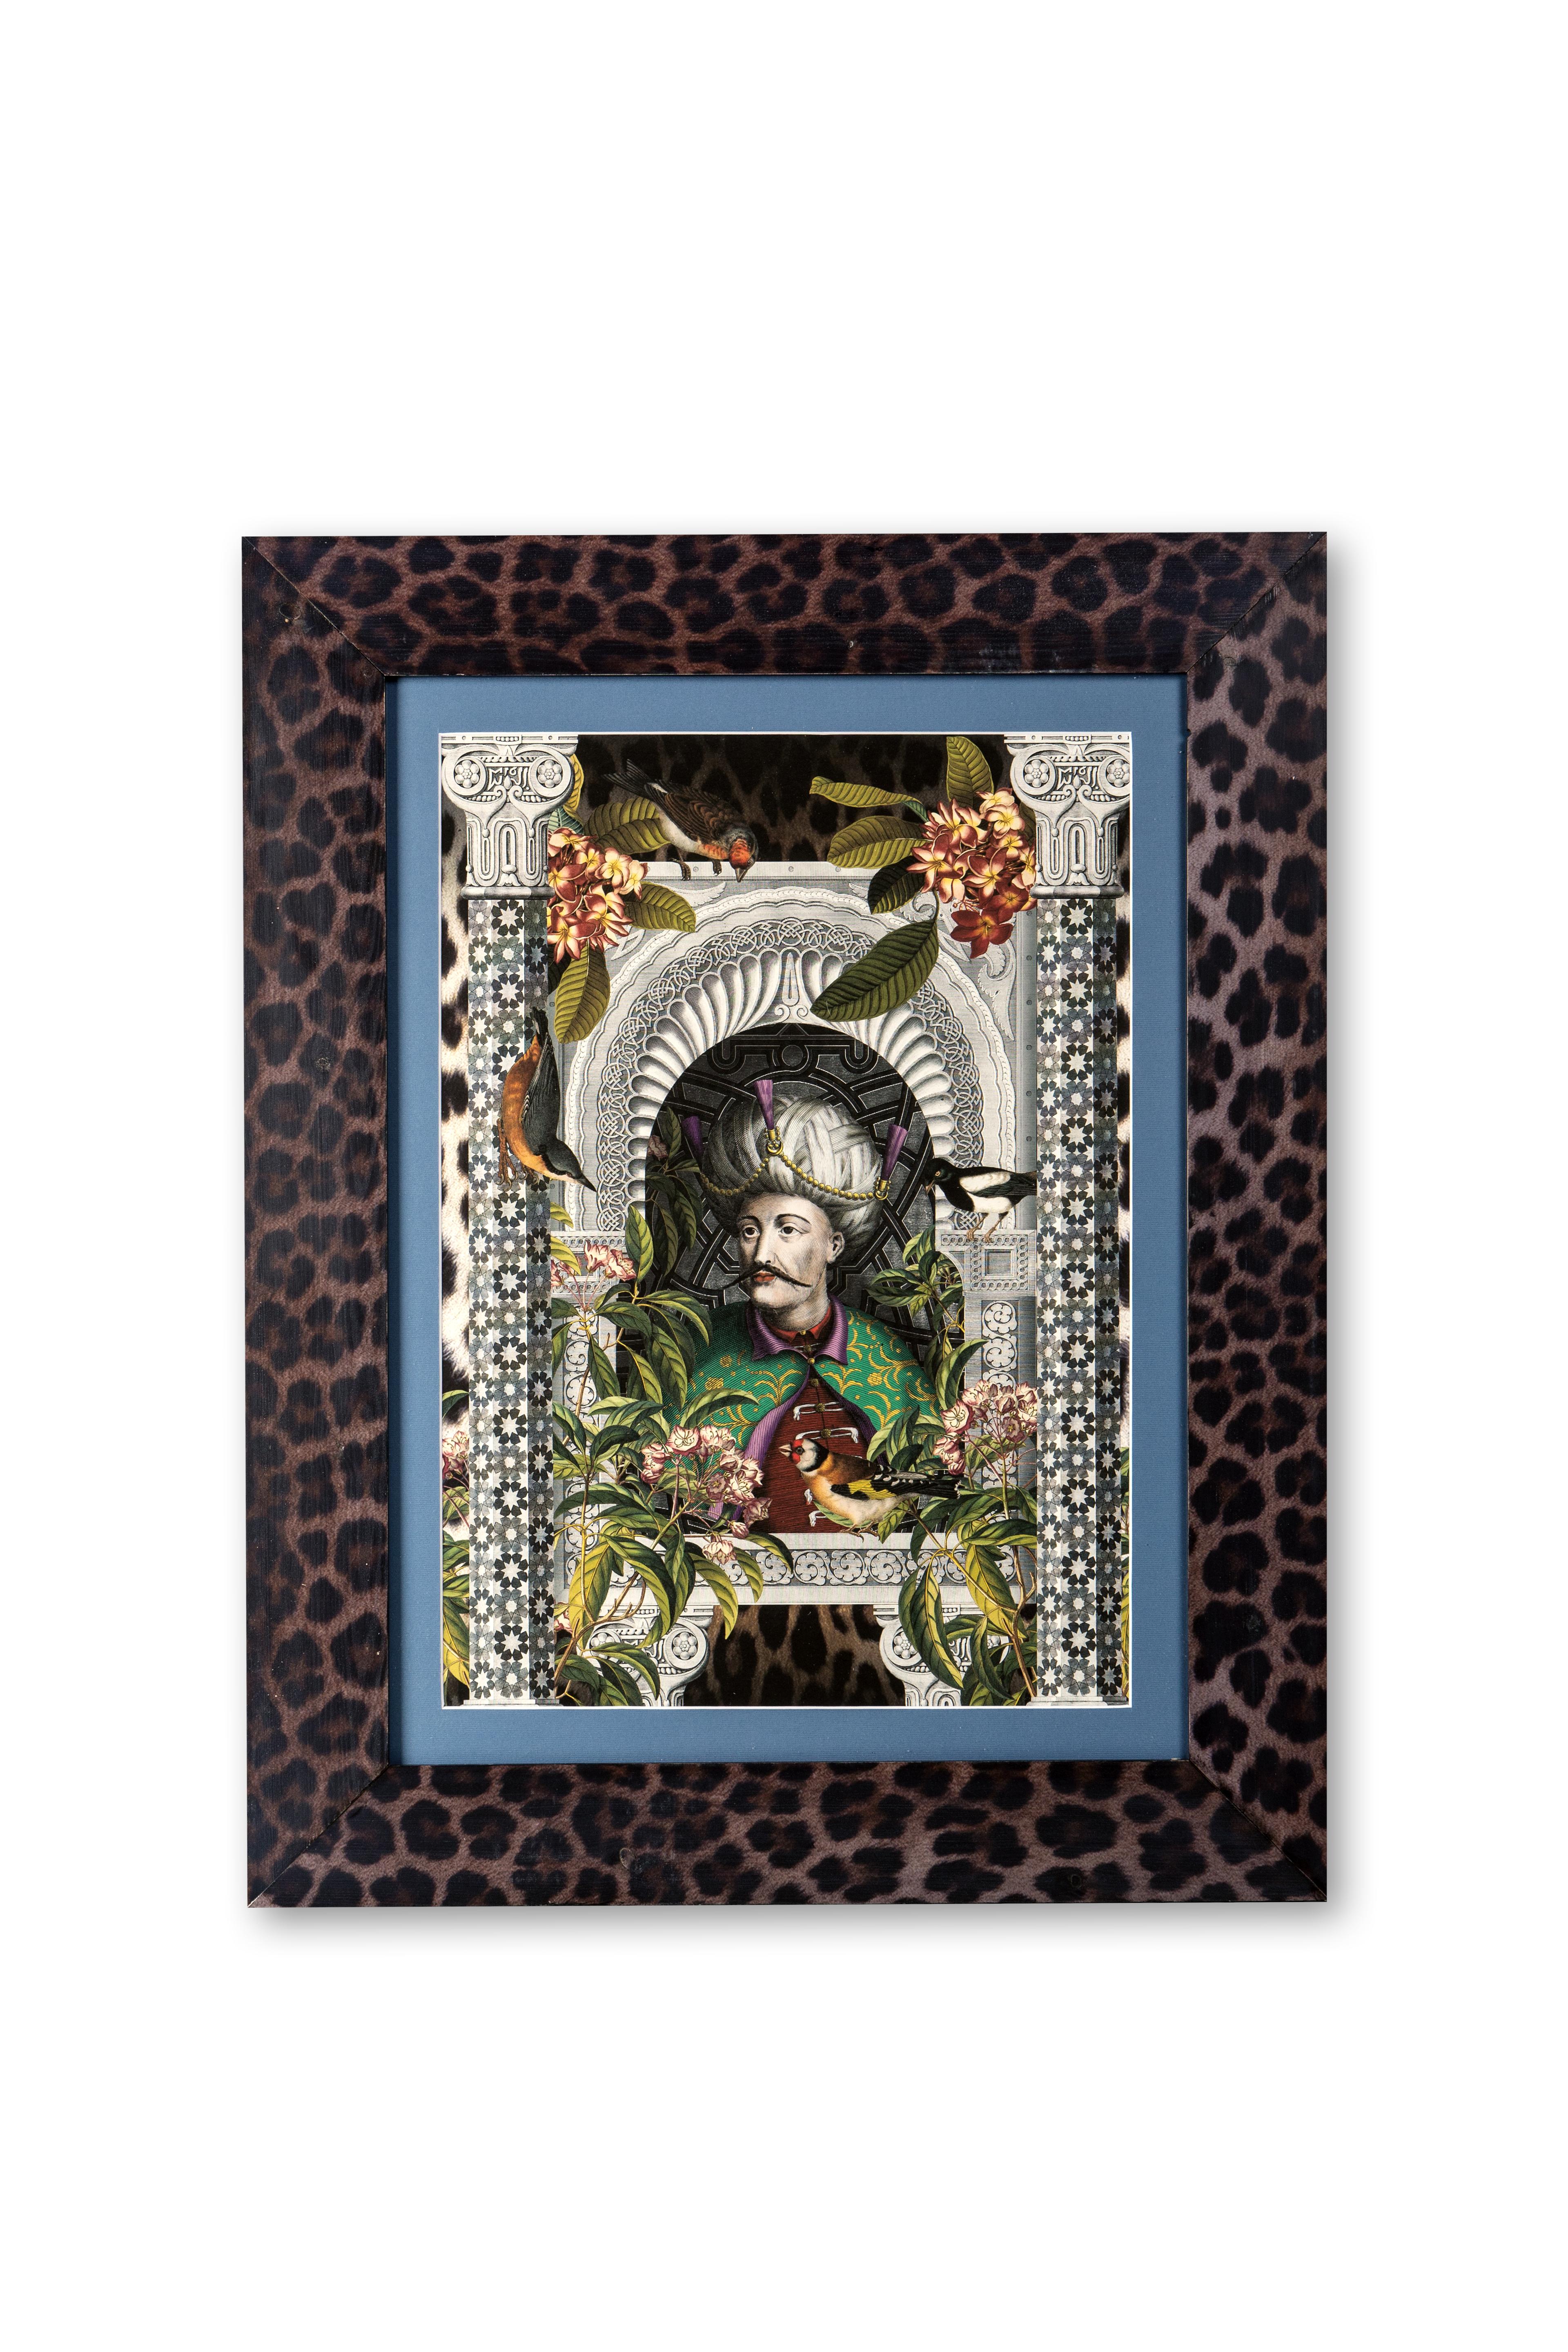 Italian Contemporary Gliceé Ottoman Print n.1 with Printed Leopard Wood Frame In New Condition For Sale In Scandicci, Florence